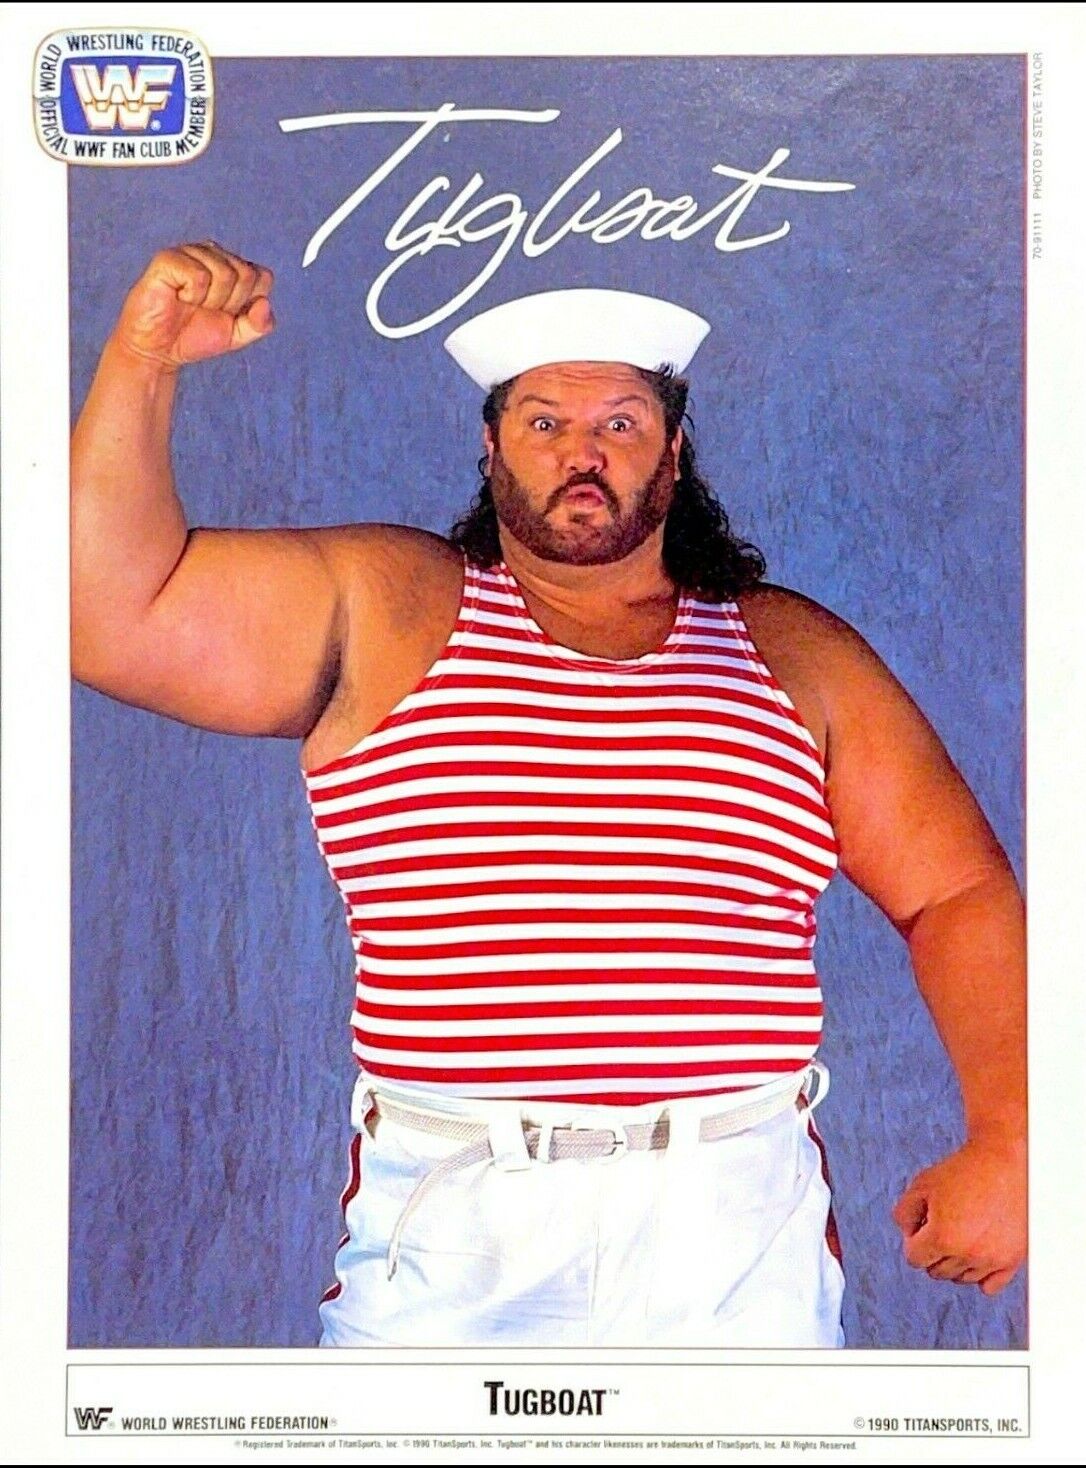 WWE TUGBOAT 1990 OFFICIAL LICENSED 8.5X11 ORIGINAL FACSIMILE PROMO Photo Poster painting